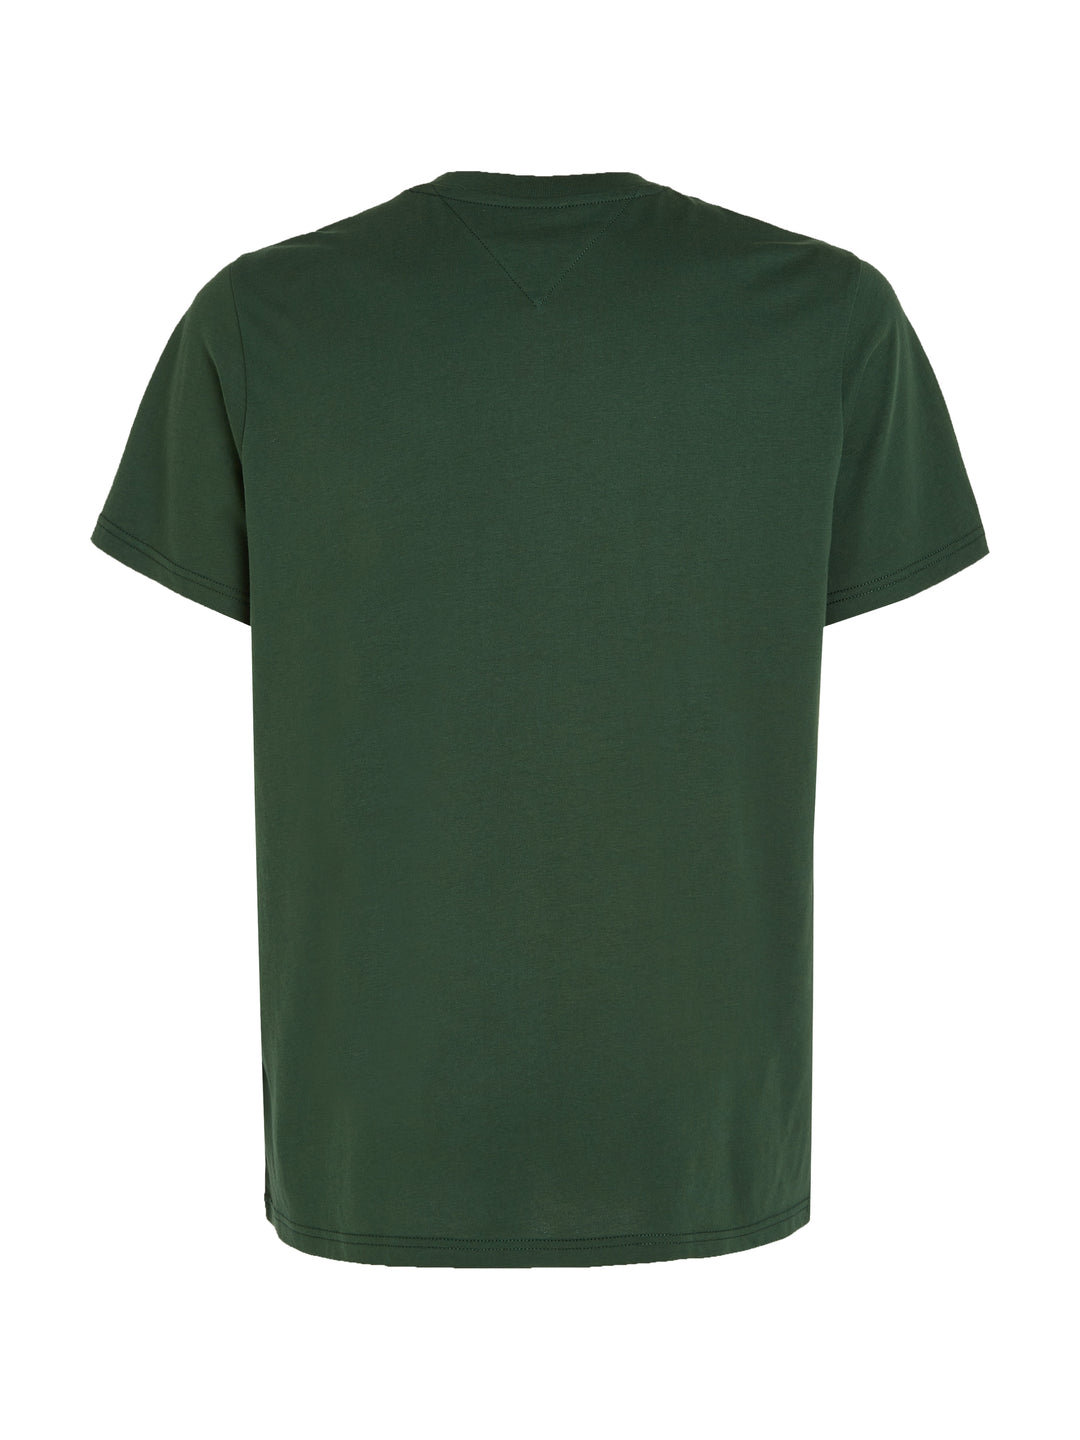 TJ RGLR ENTRY GRAPHIC TEE - GREEN